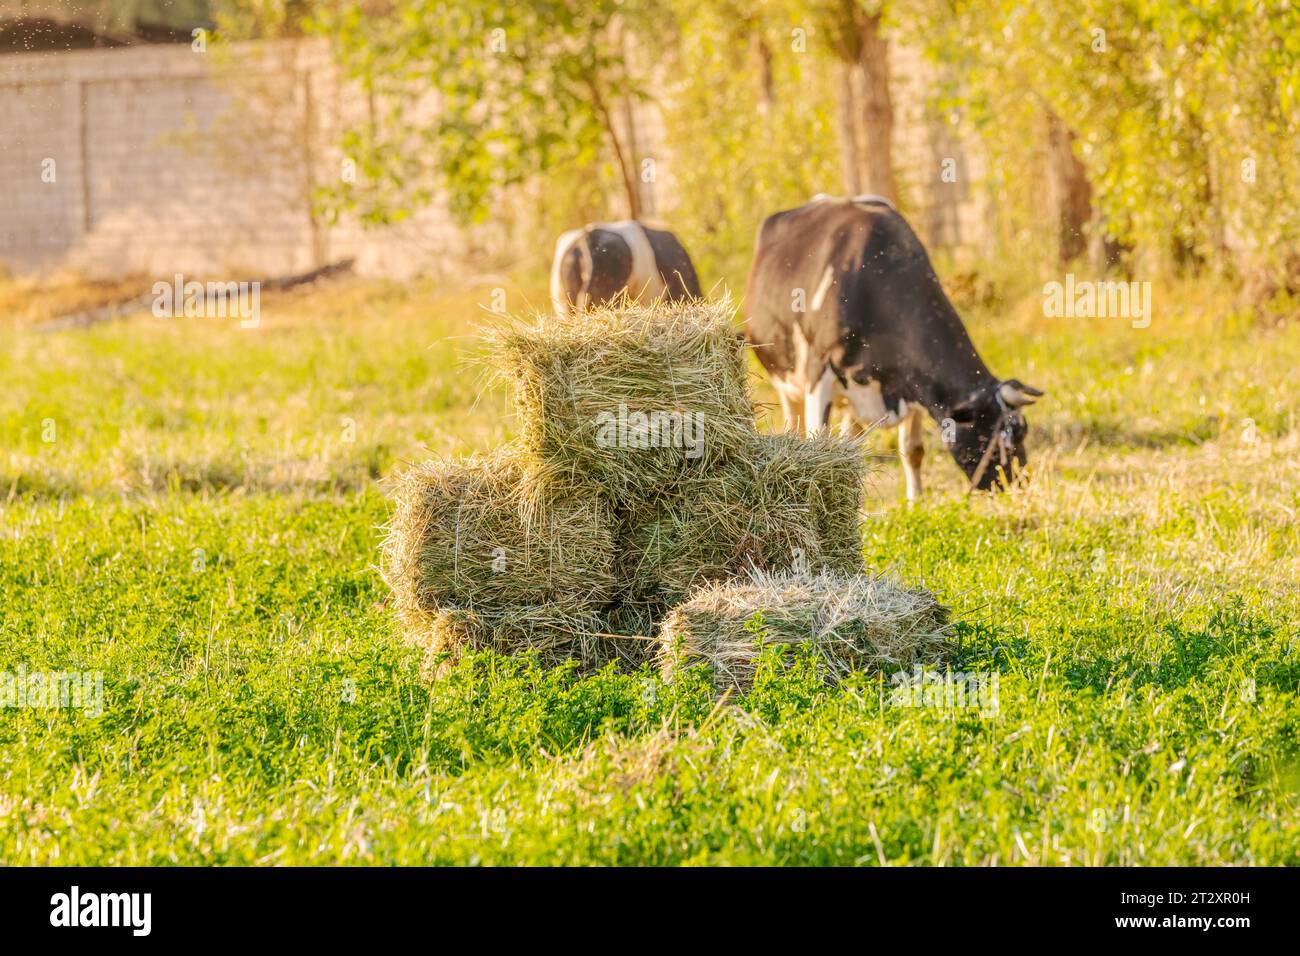 Agriculture. Farming area with organic food for cows and rams (livestock). Hayloft Stock Photo